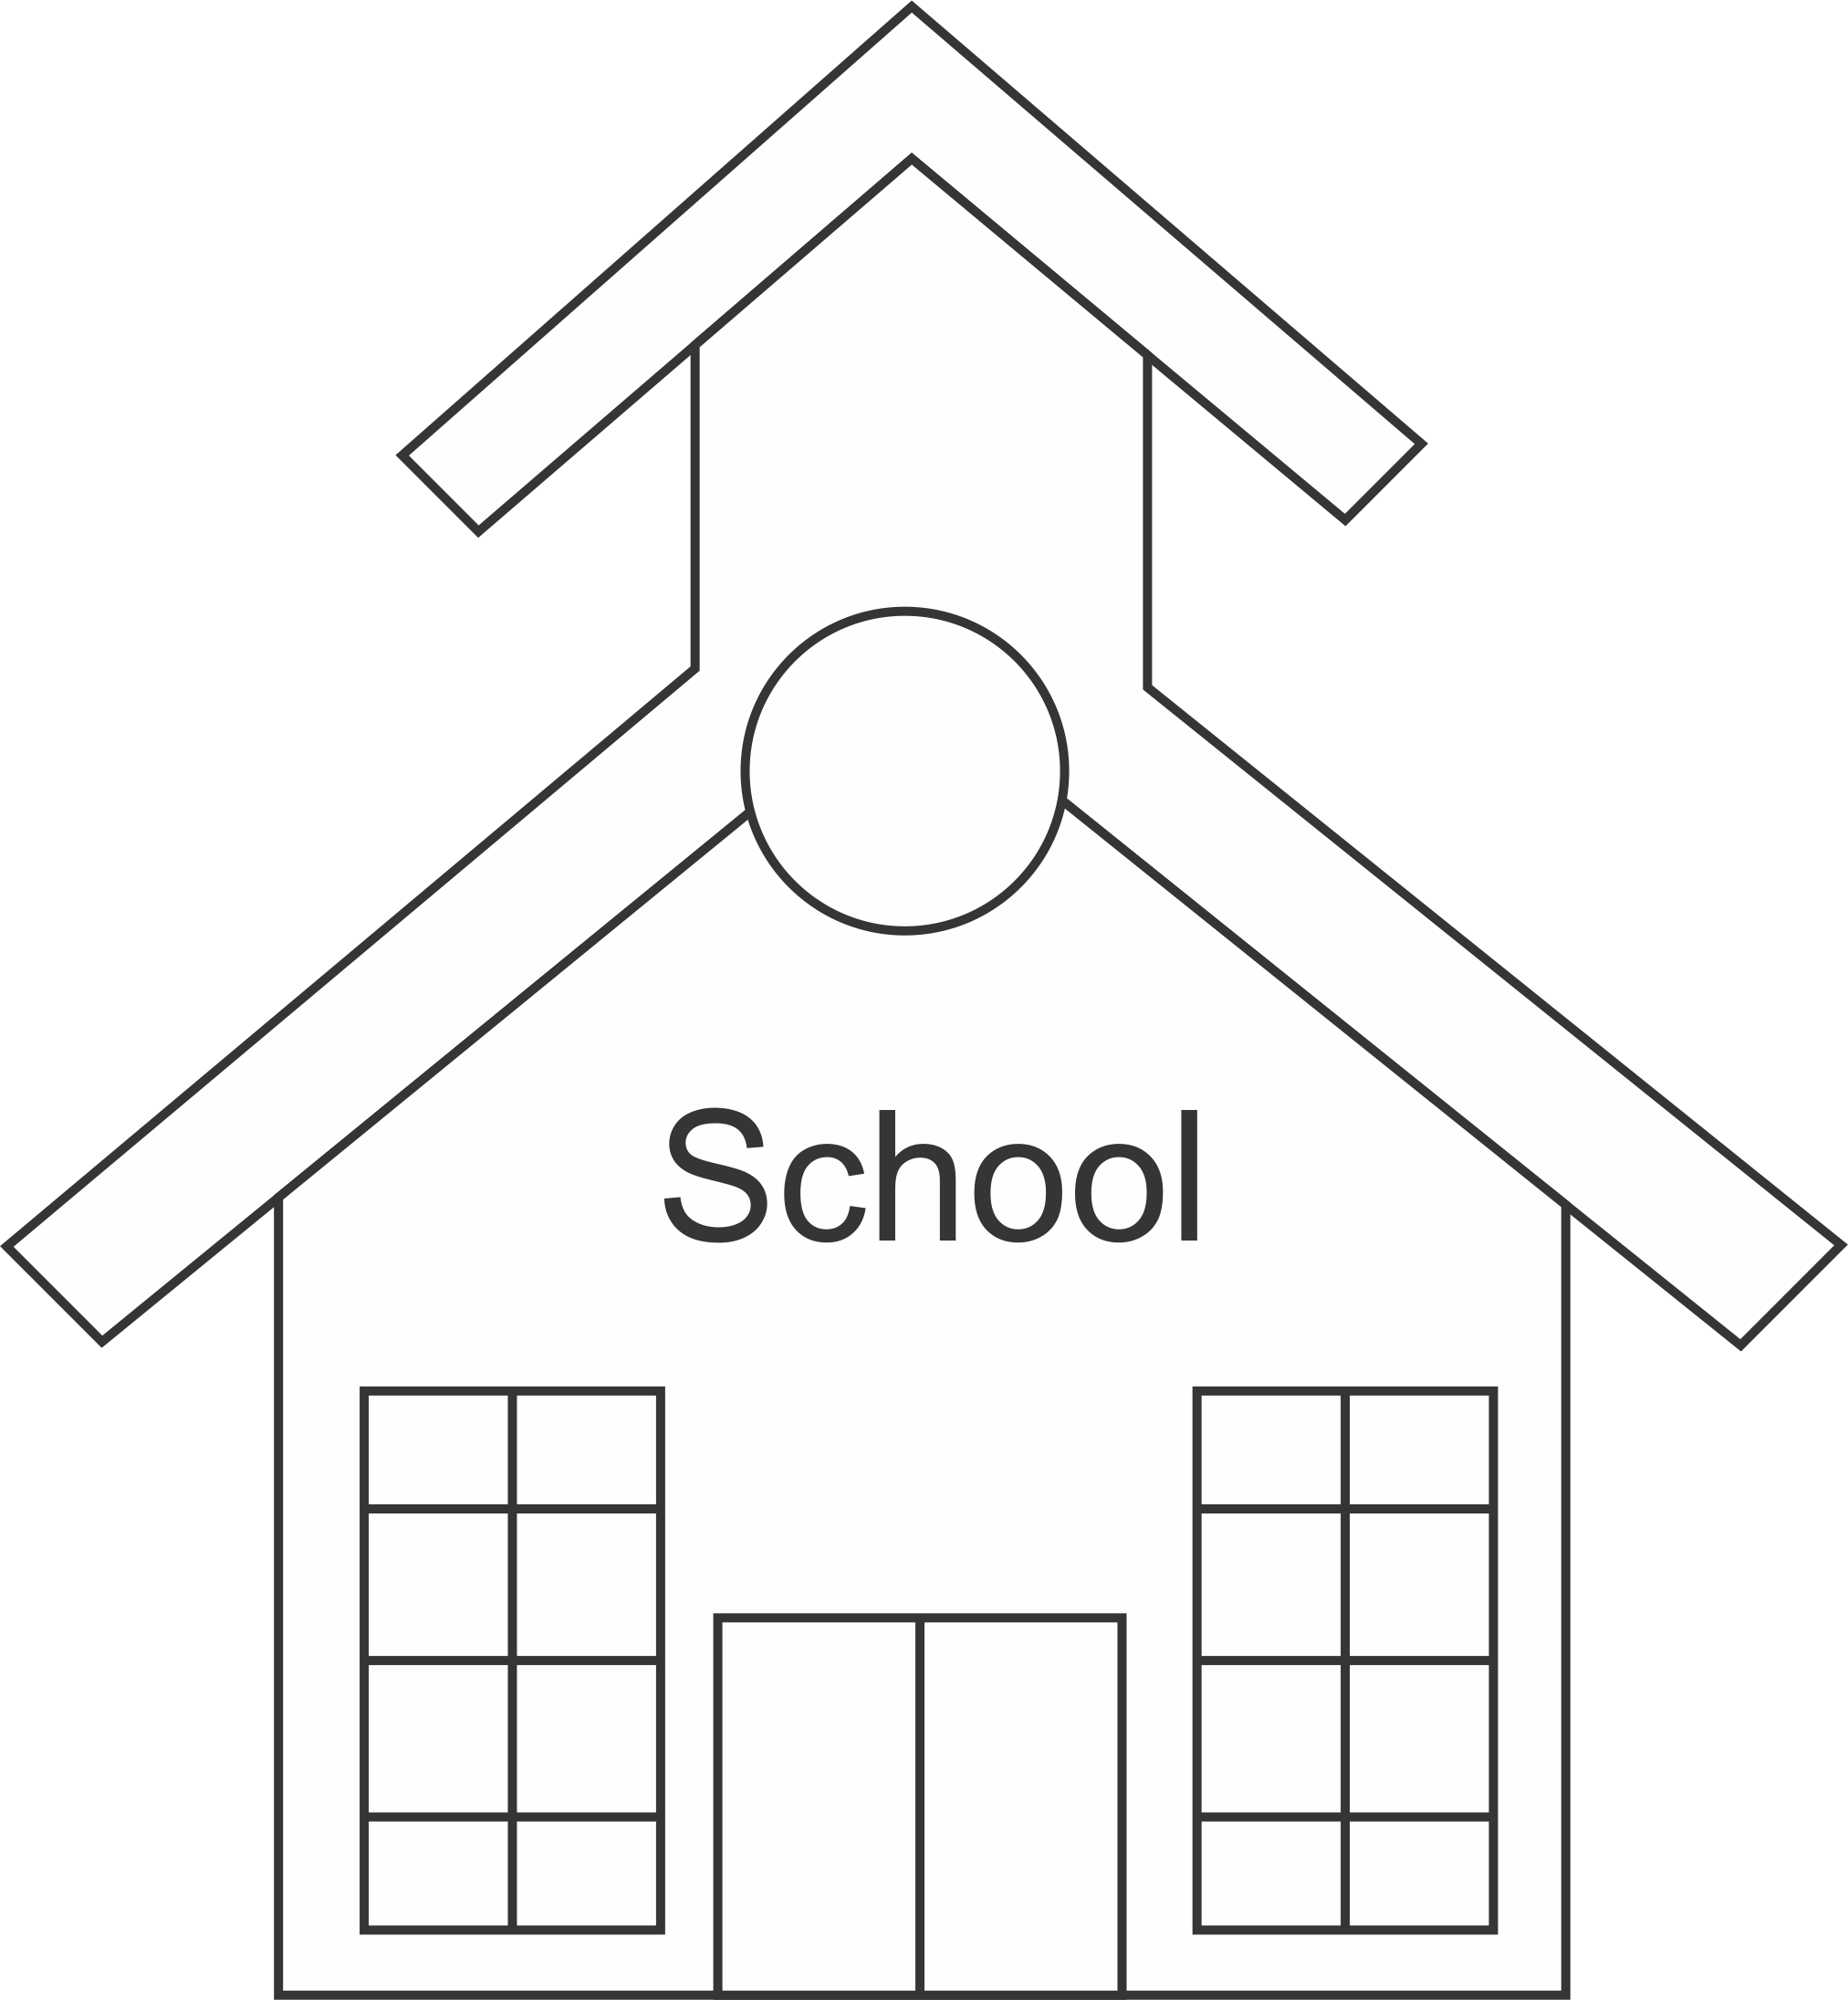 School House Md   Free Images At Clker Com   Vector Clip Art Online